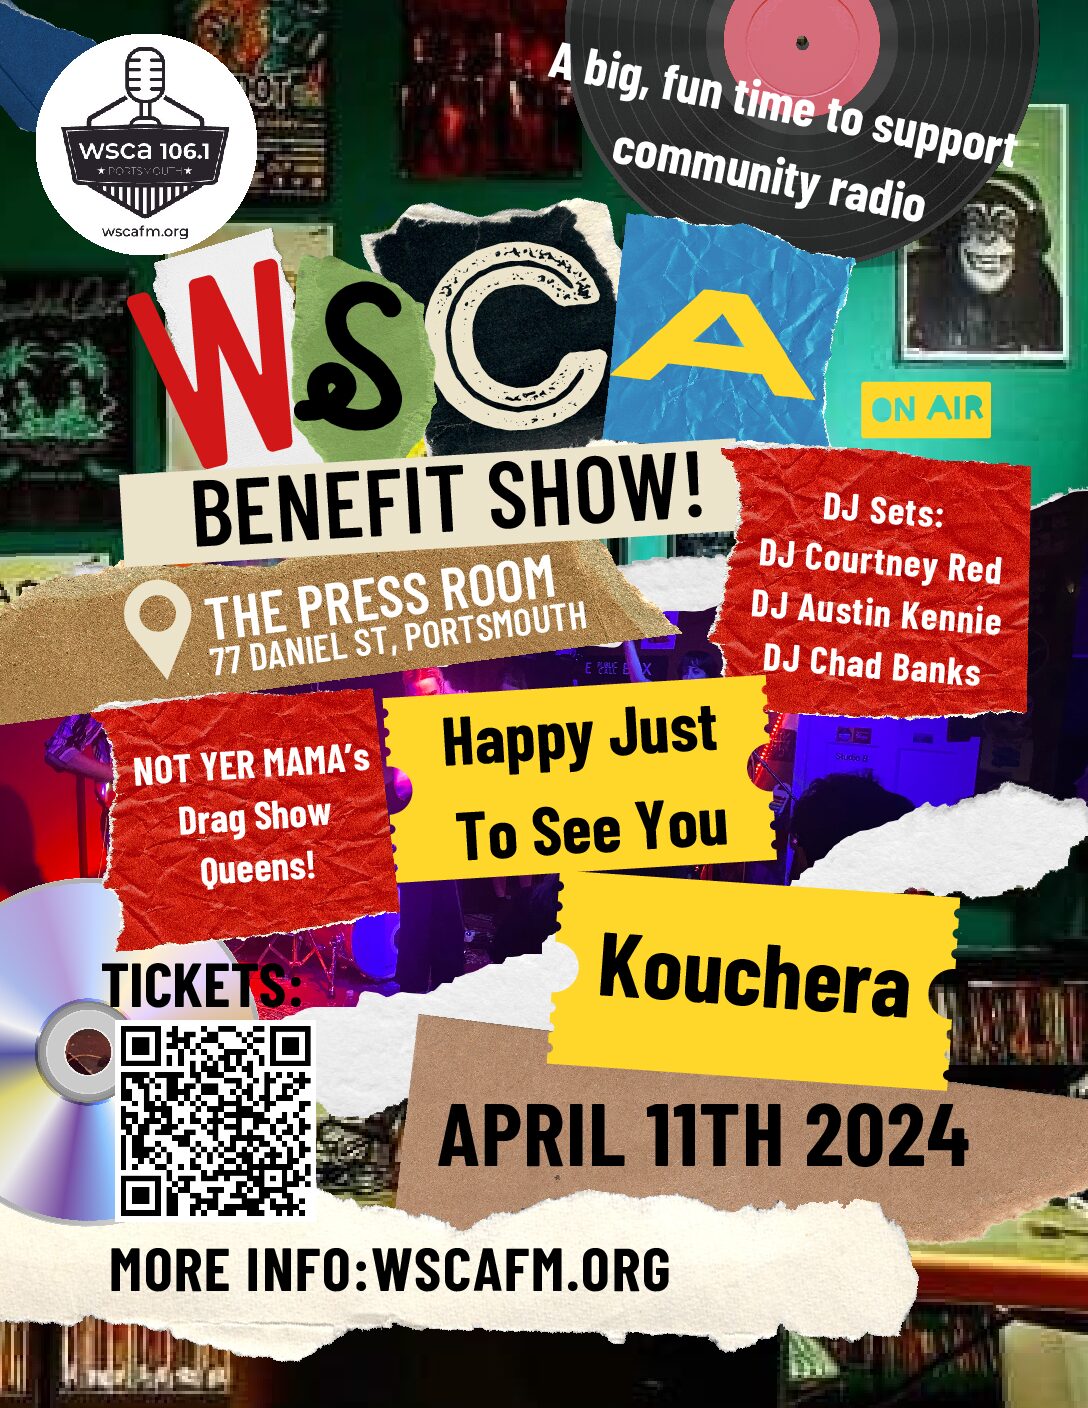 WSCA BENEFIT SHOW! – April 11th at The Press Room